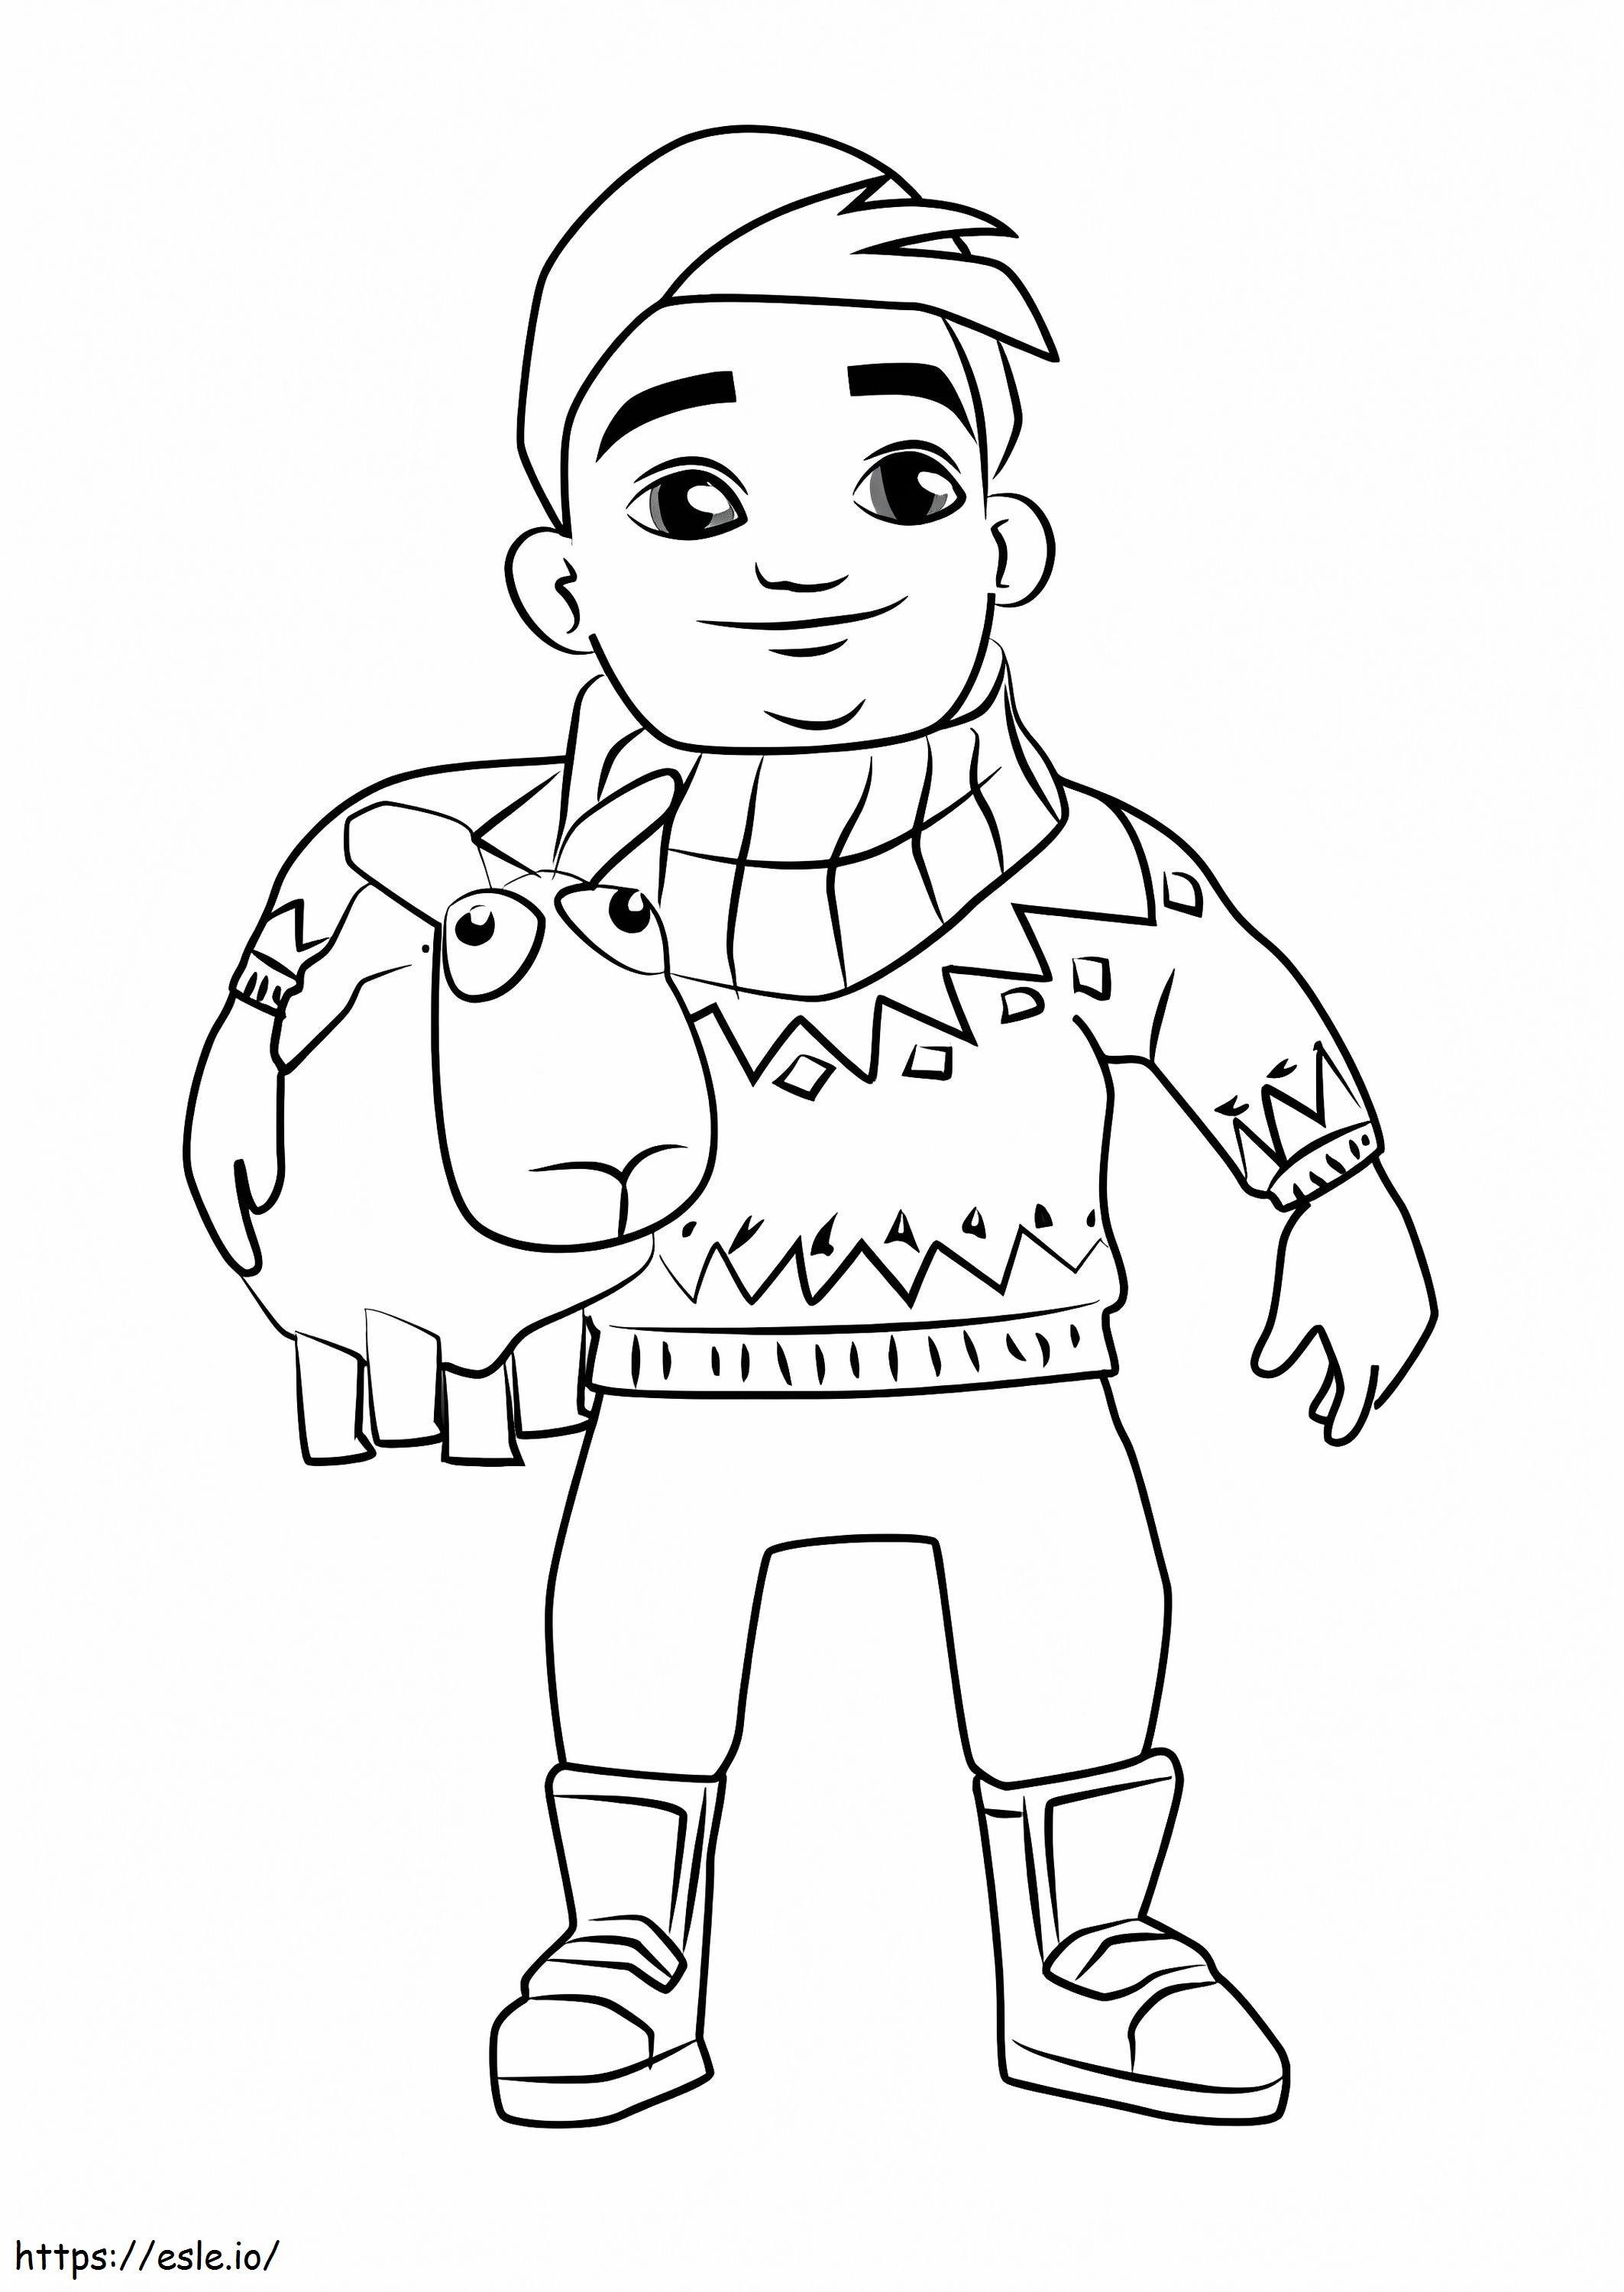 Bjarki From Subway Surfers coloring page